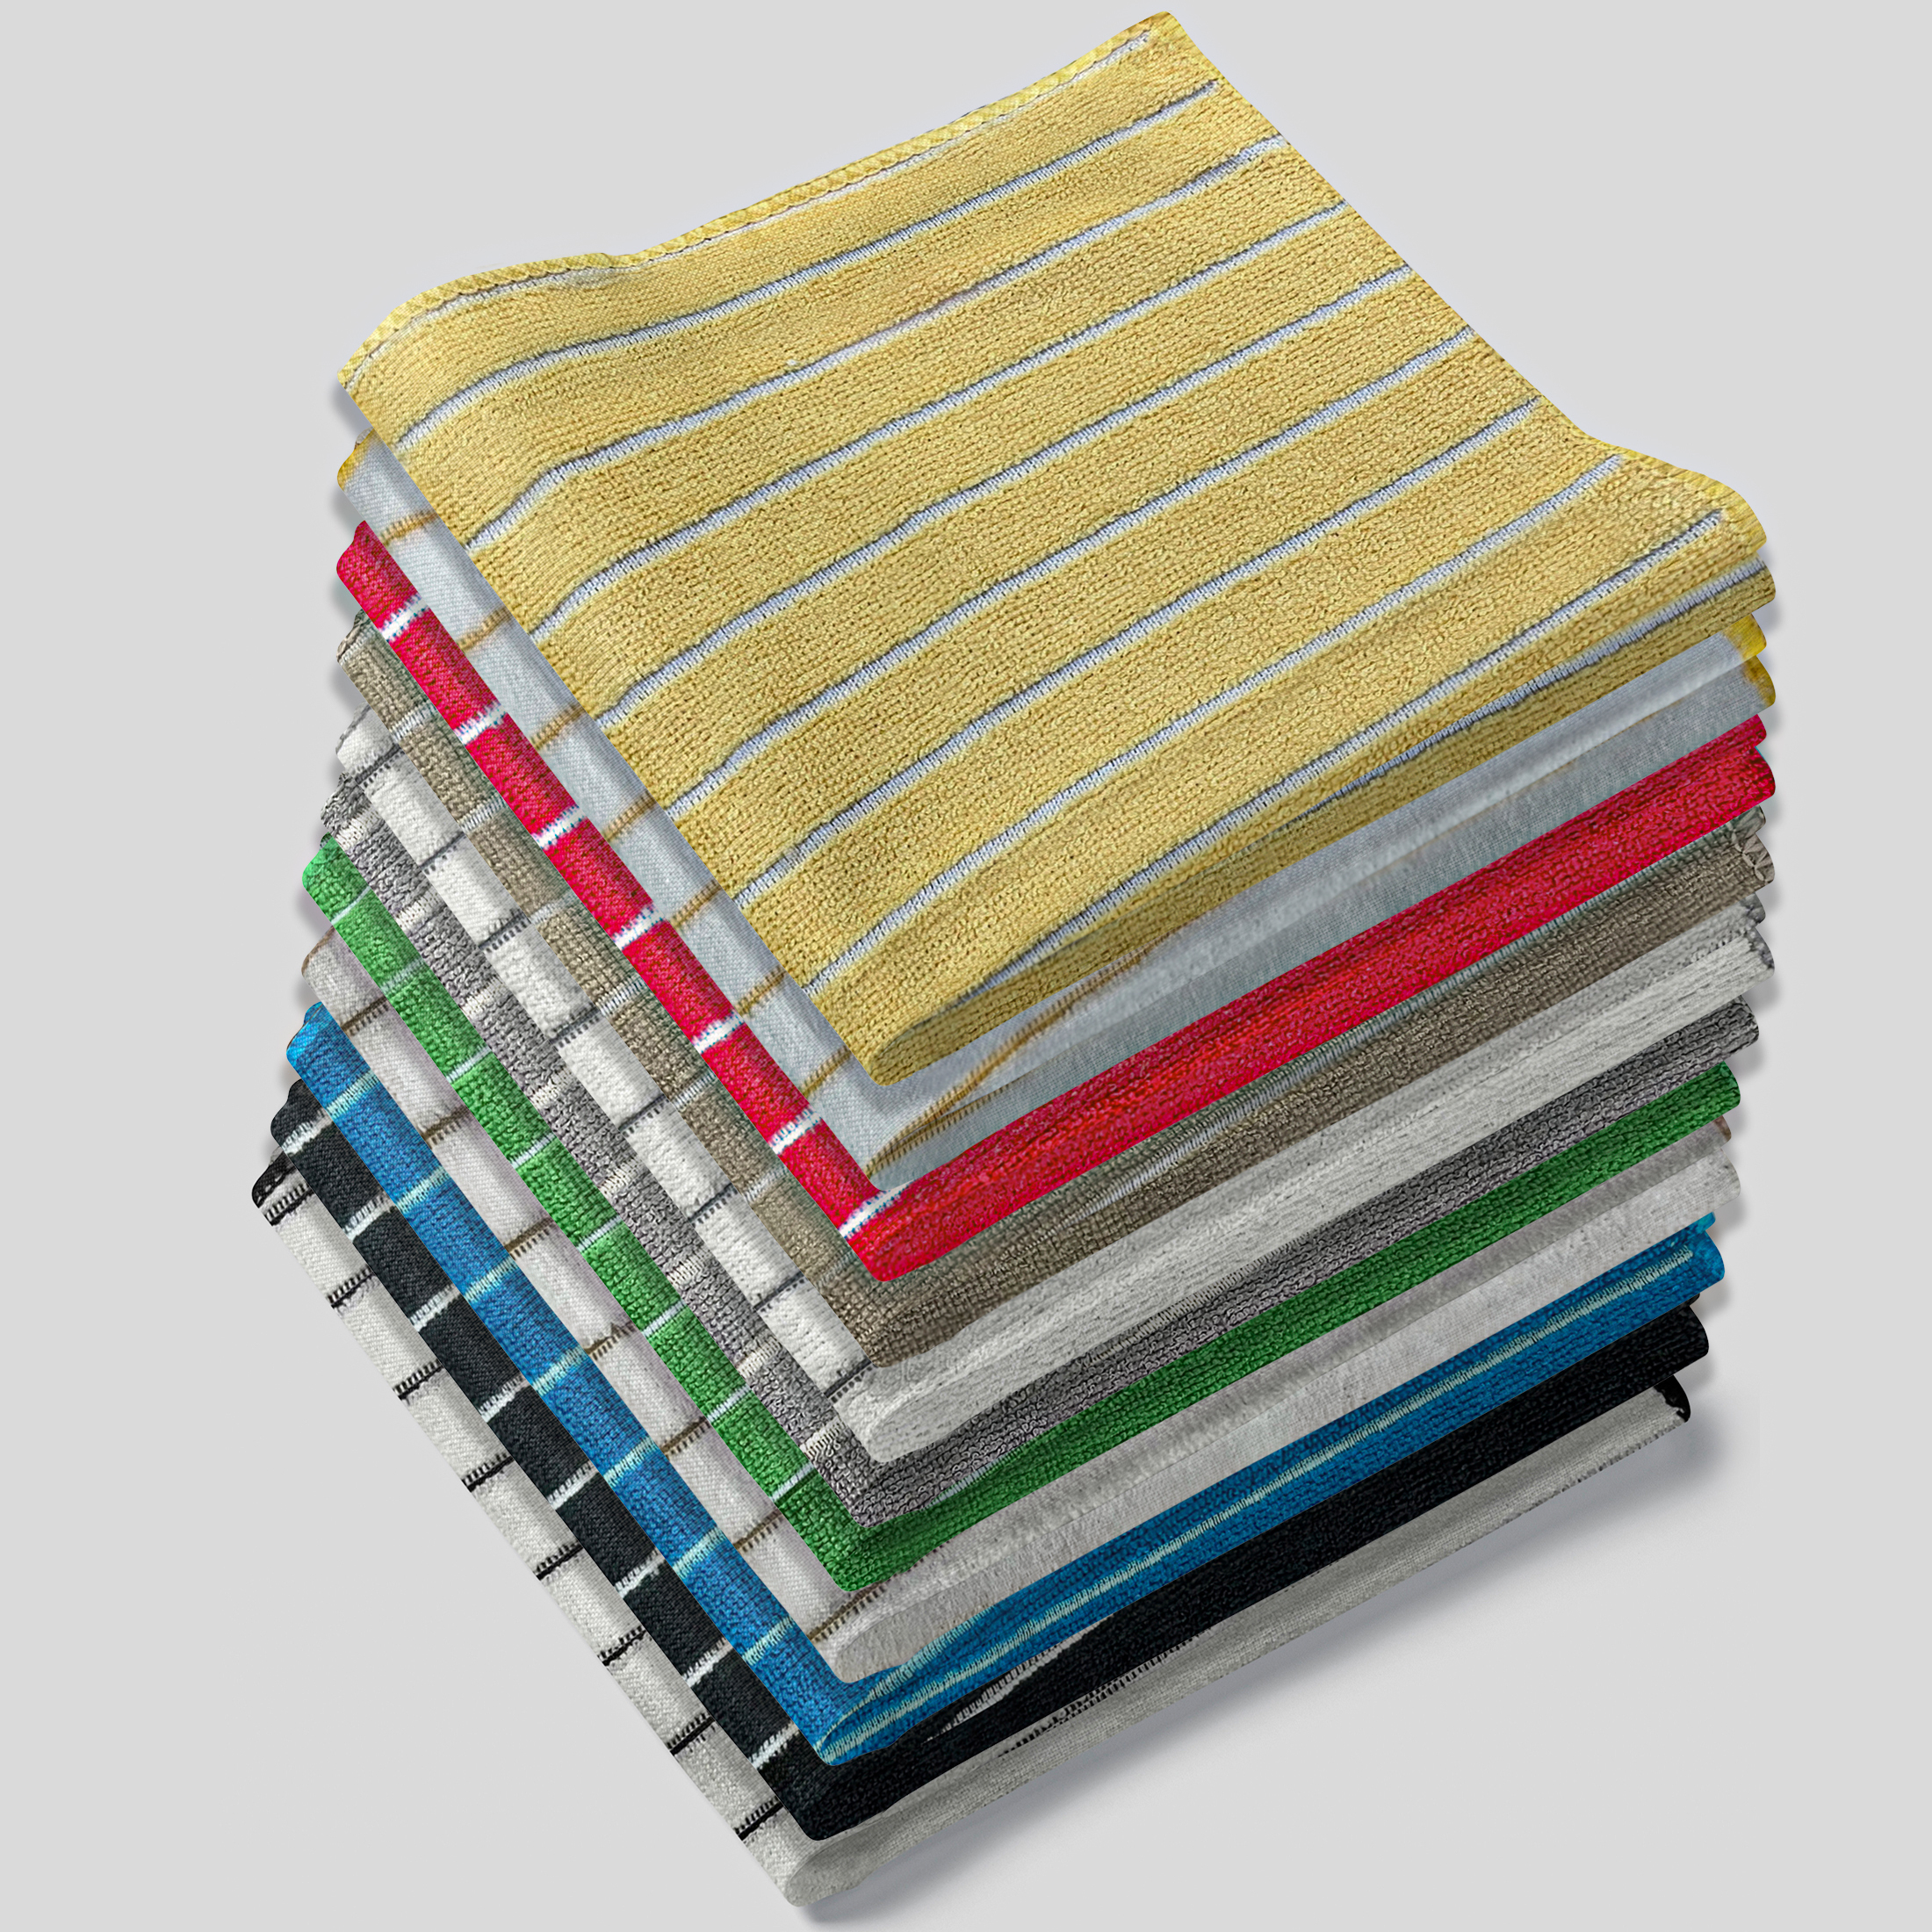 12-Pack Absorbent And Super Soft Microfiber Dish Cloths - Striped